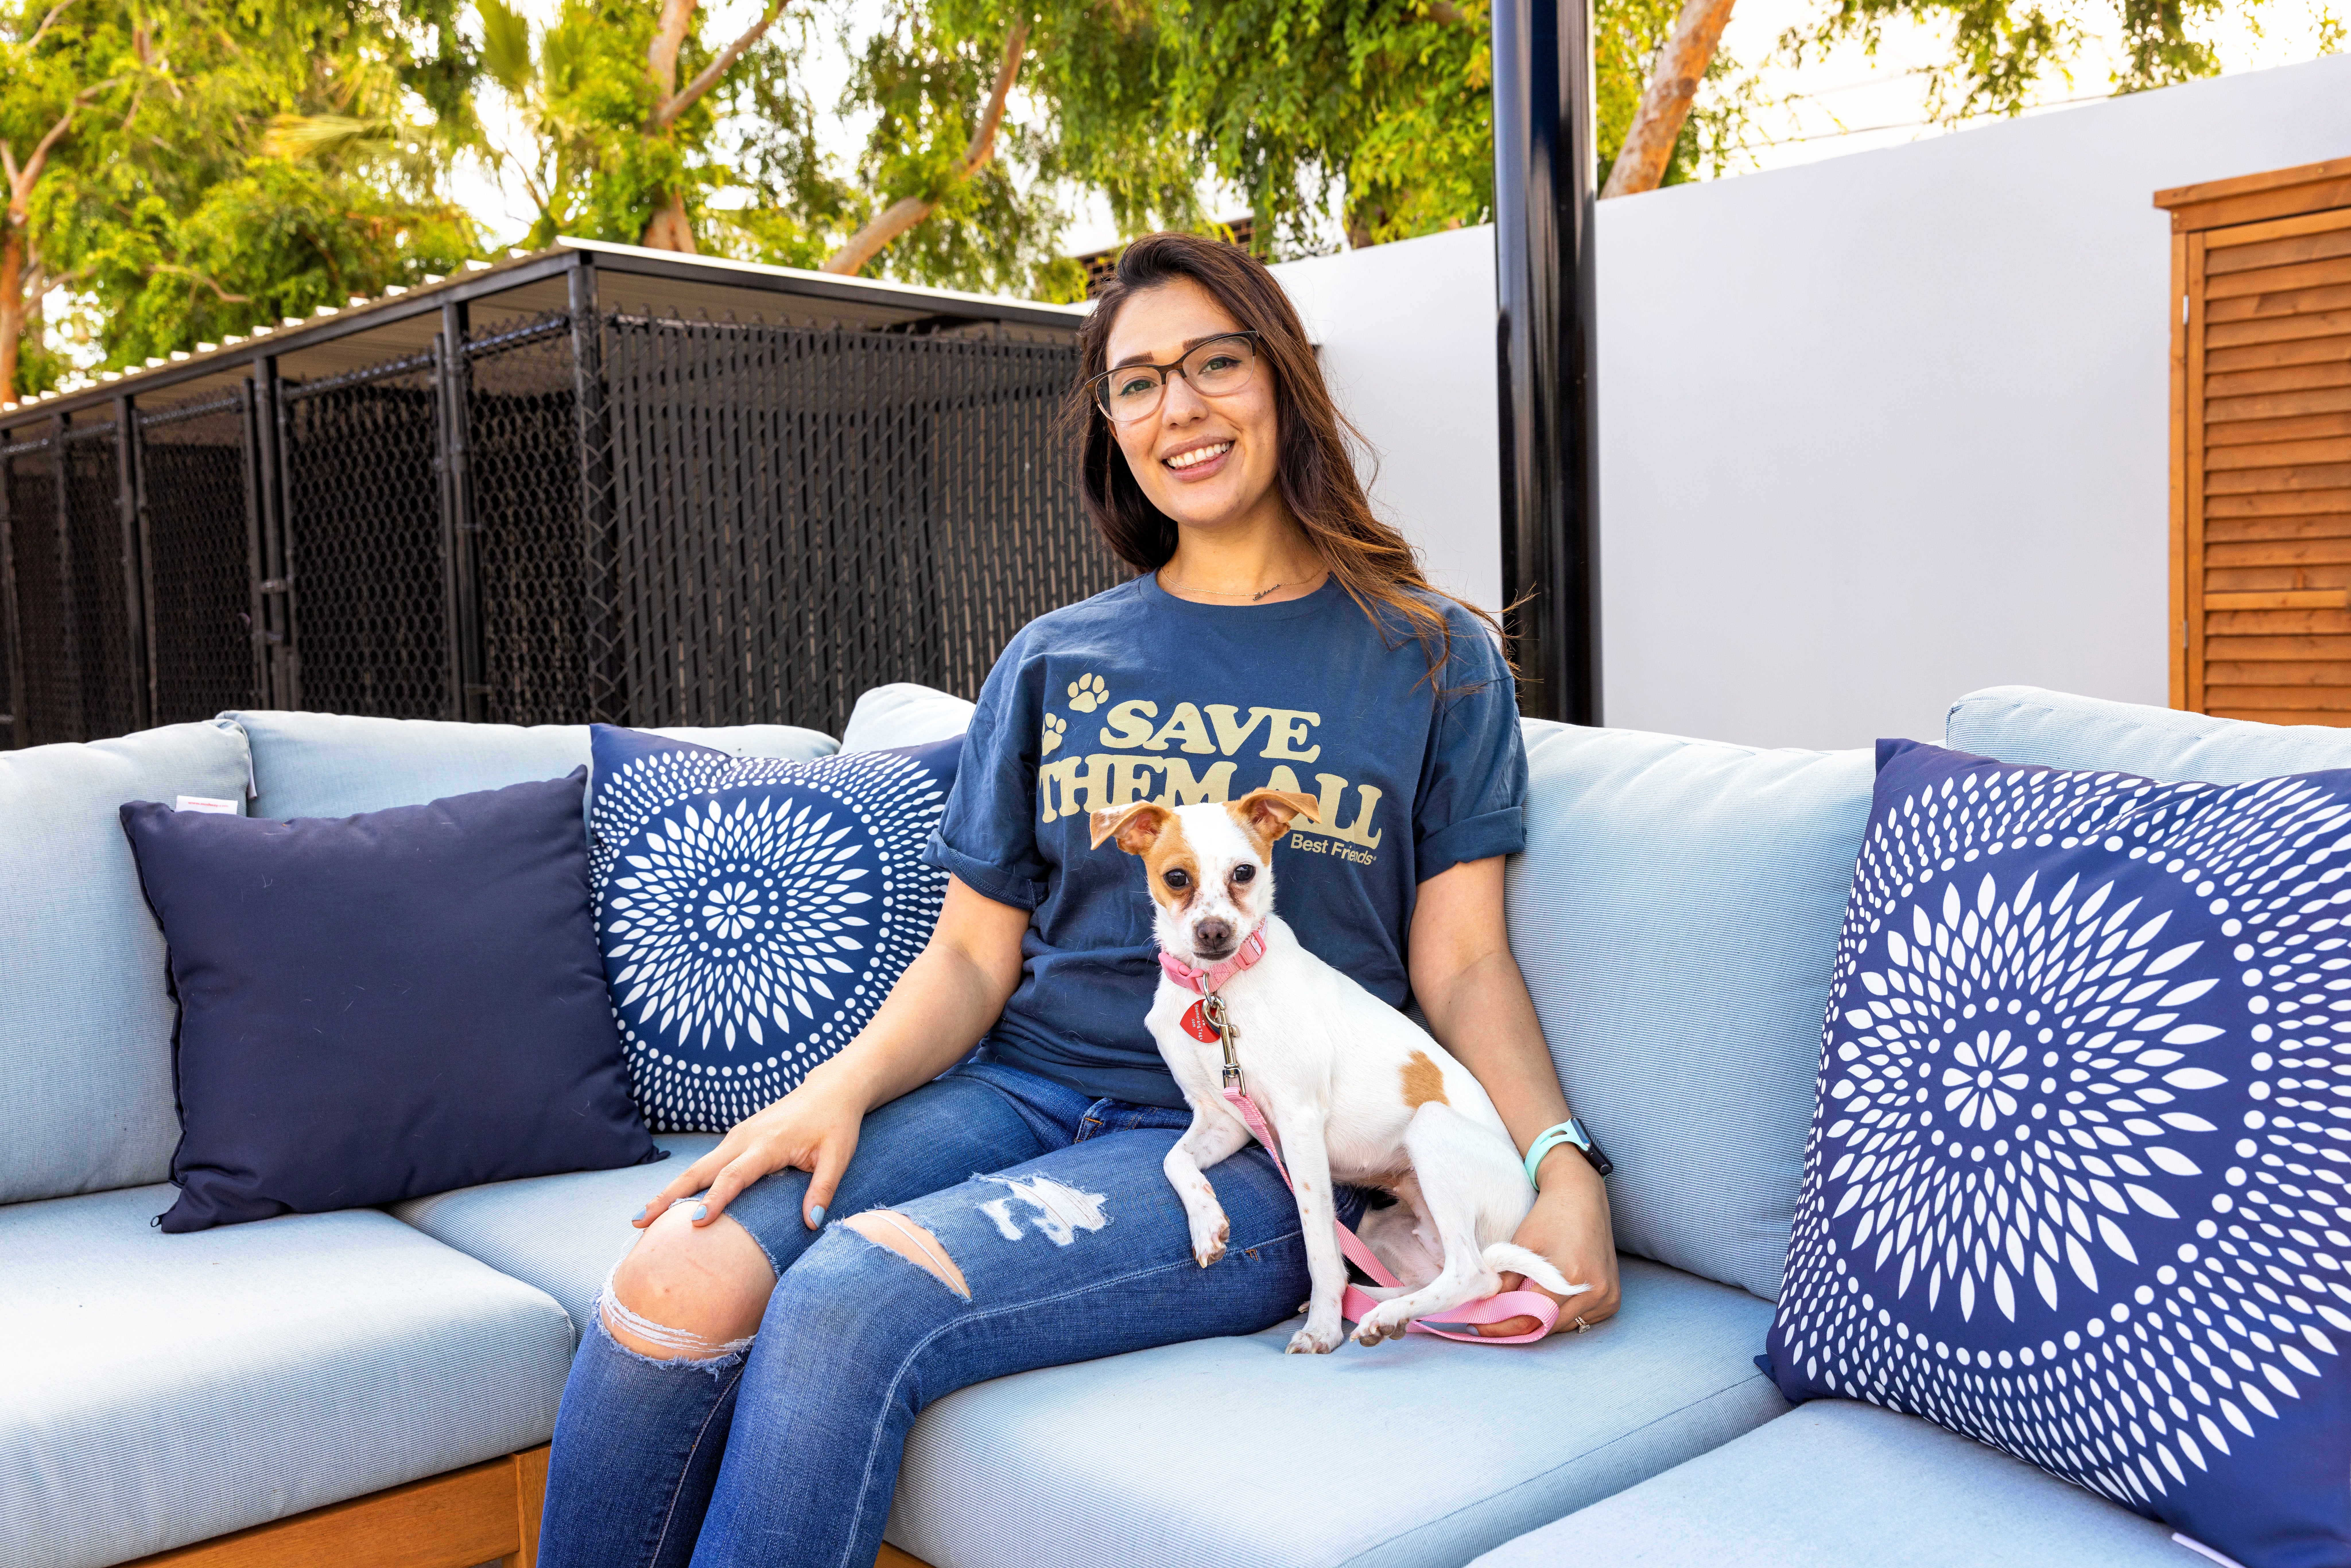 Smiling person wearing a Best Friends shirt on an outdoor couch with a dog